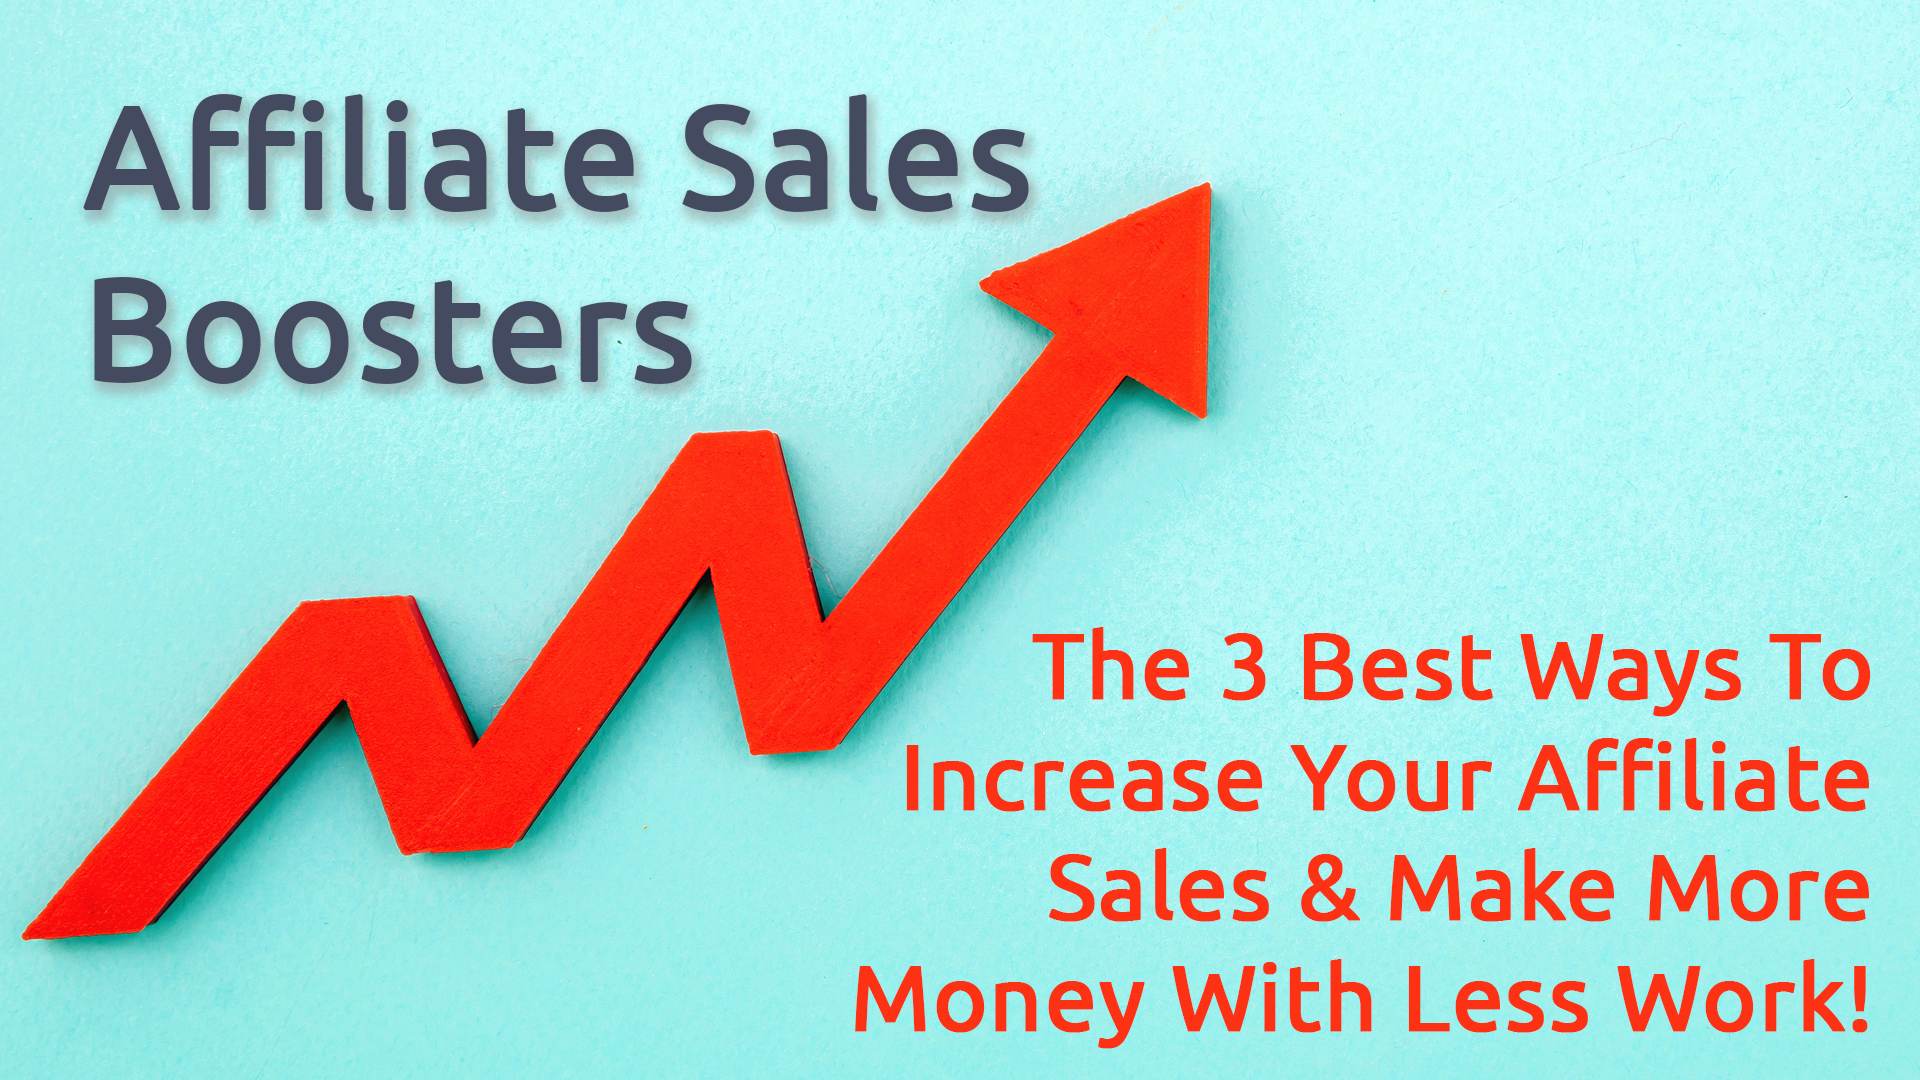 Free Video - Affiliate Sales Boosters